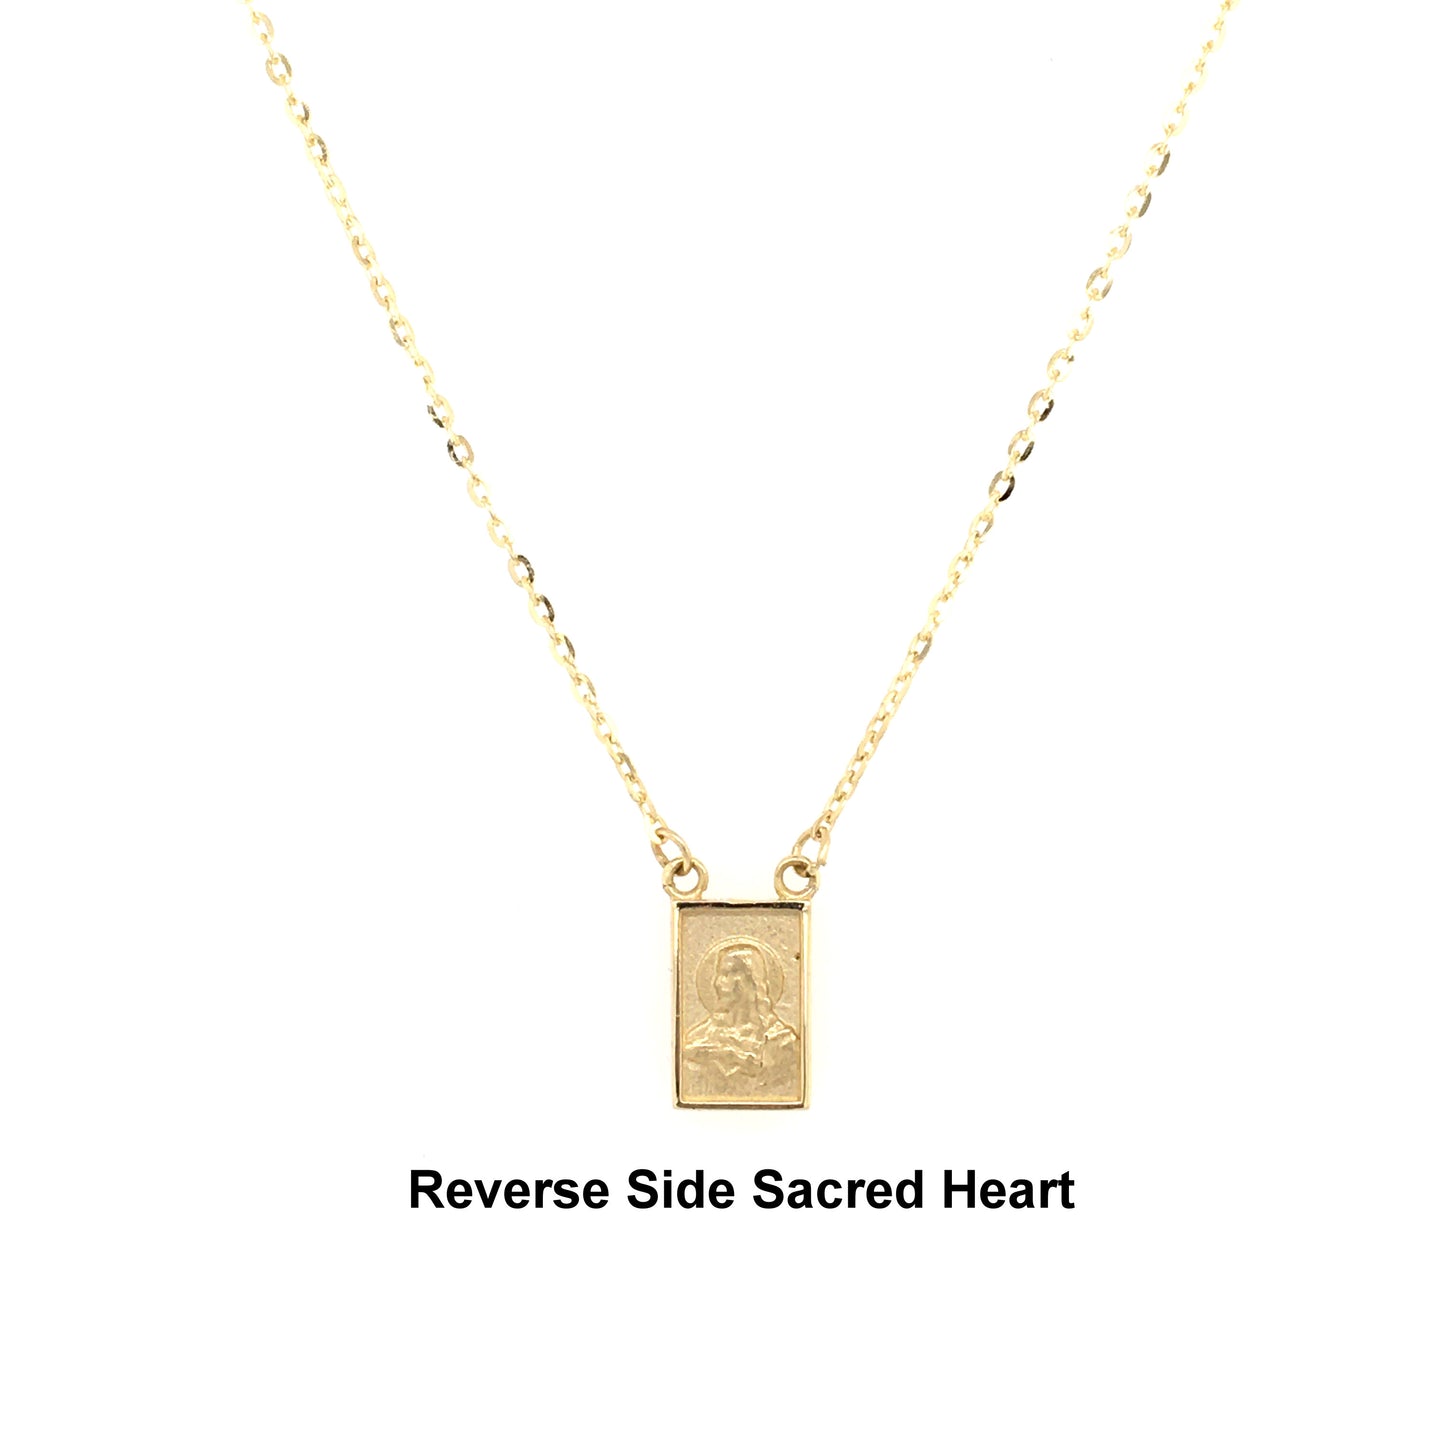 Single Small Scapular Medal Necklace